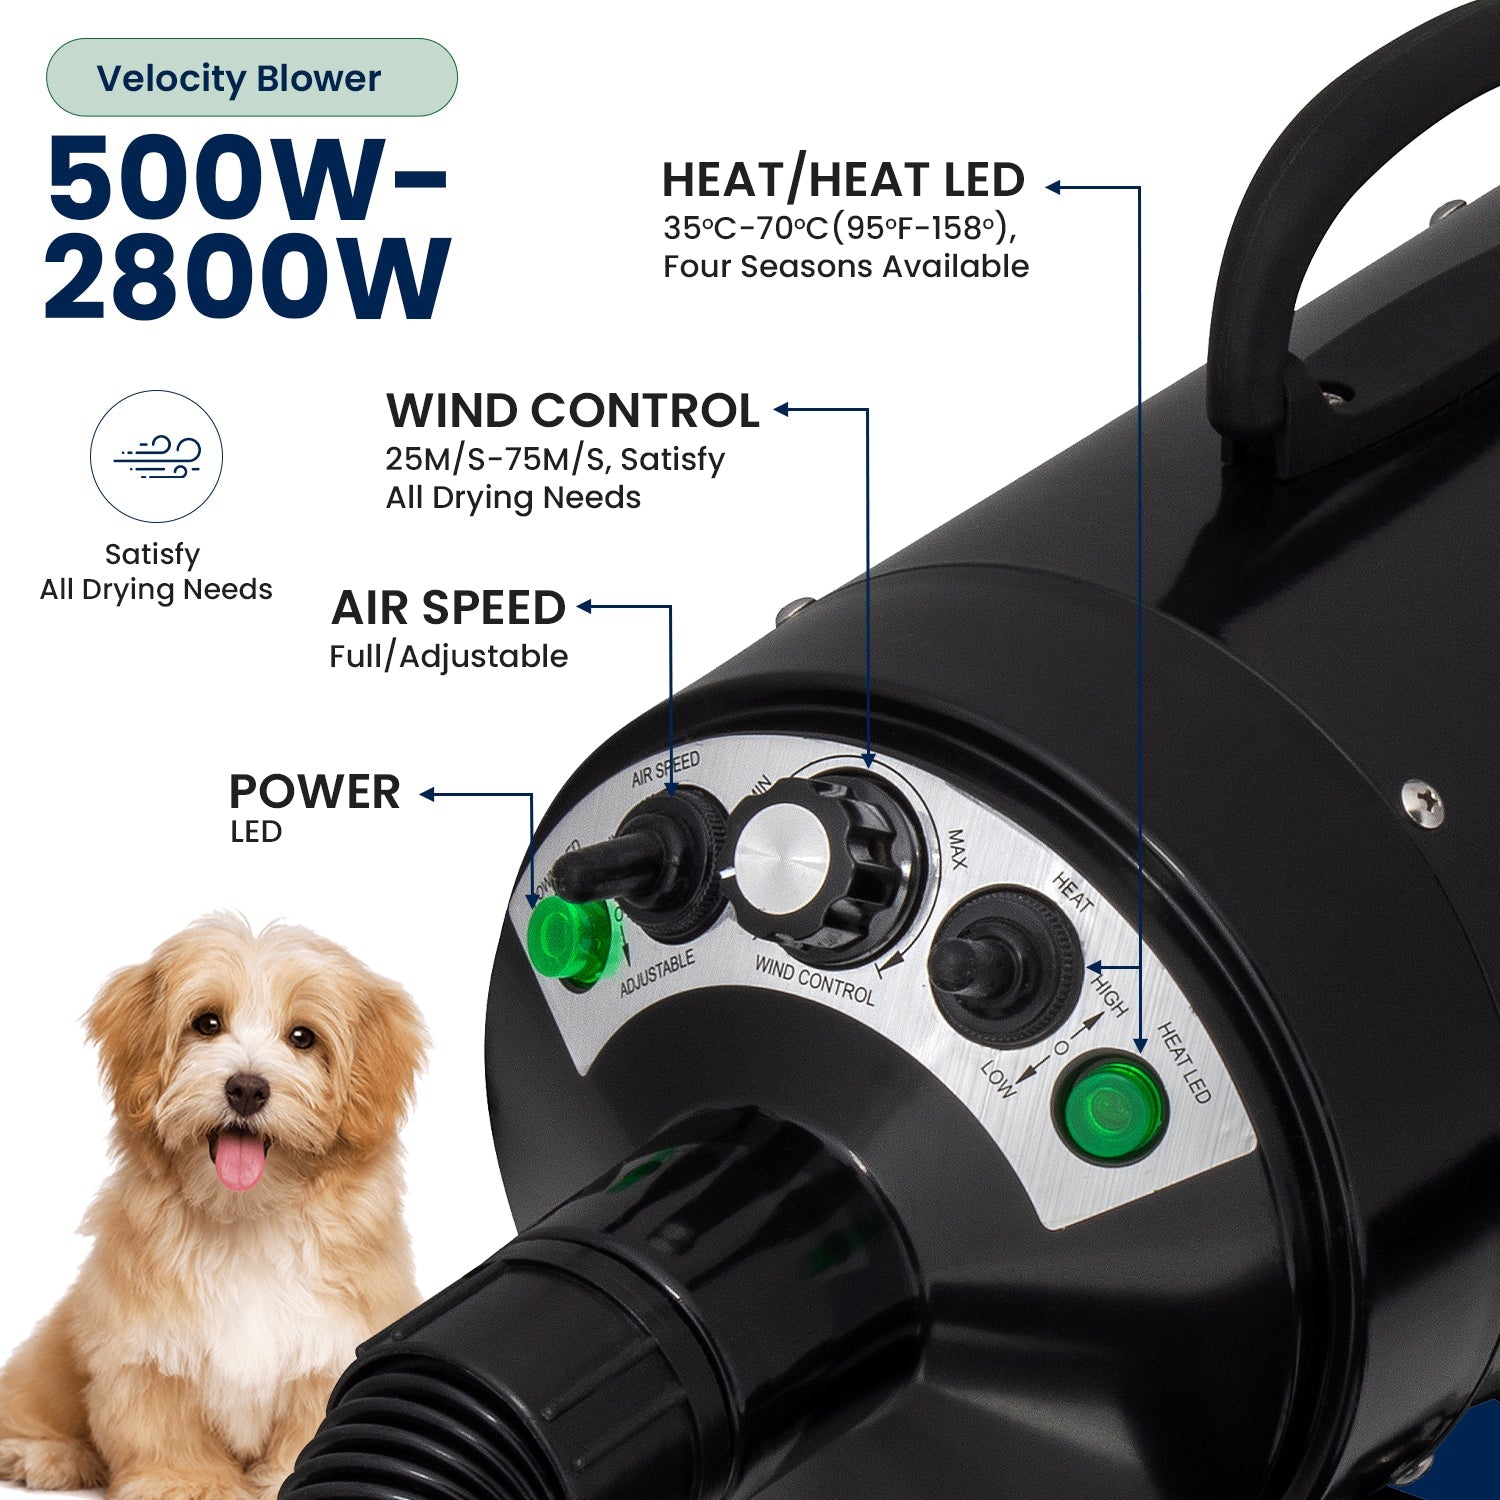 My Pet Command Dog Dryer Blower, Ultra Quiet, Professional High Velocity Blower Adjustable Hot and Cold Airflow - My Pet Command